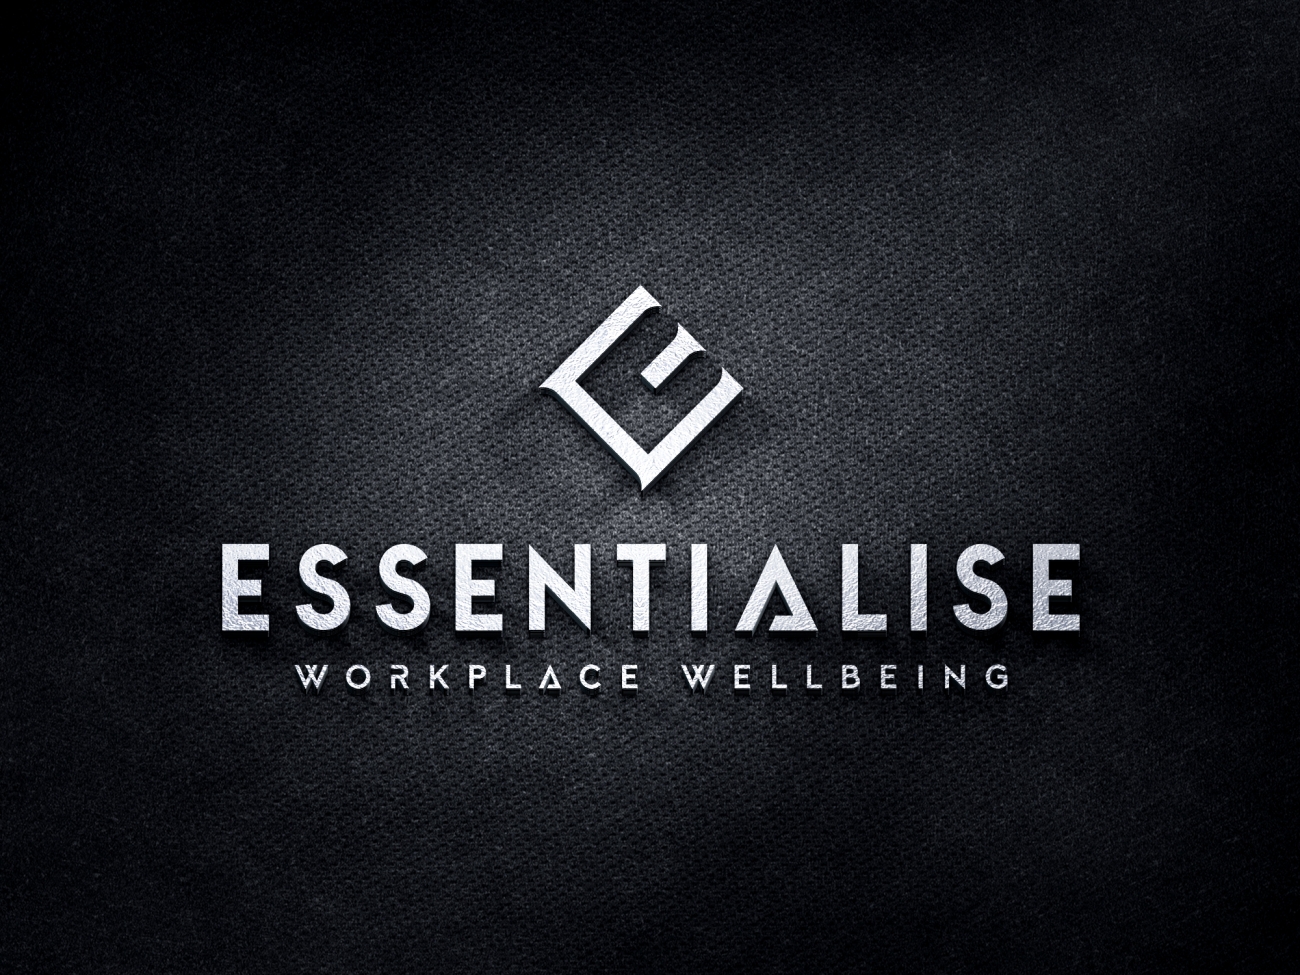 Lee Chambers, founder of Essentialise, website